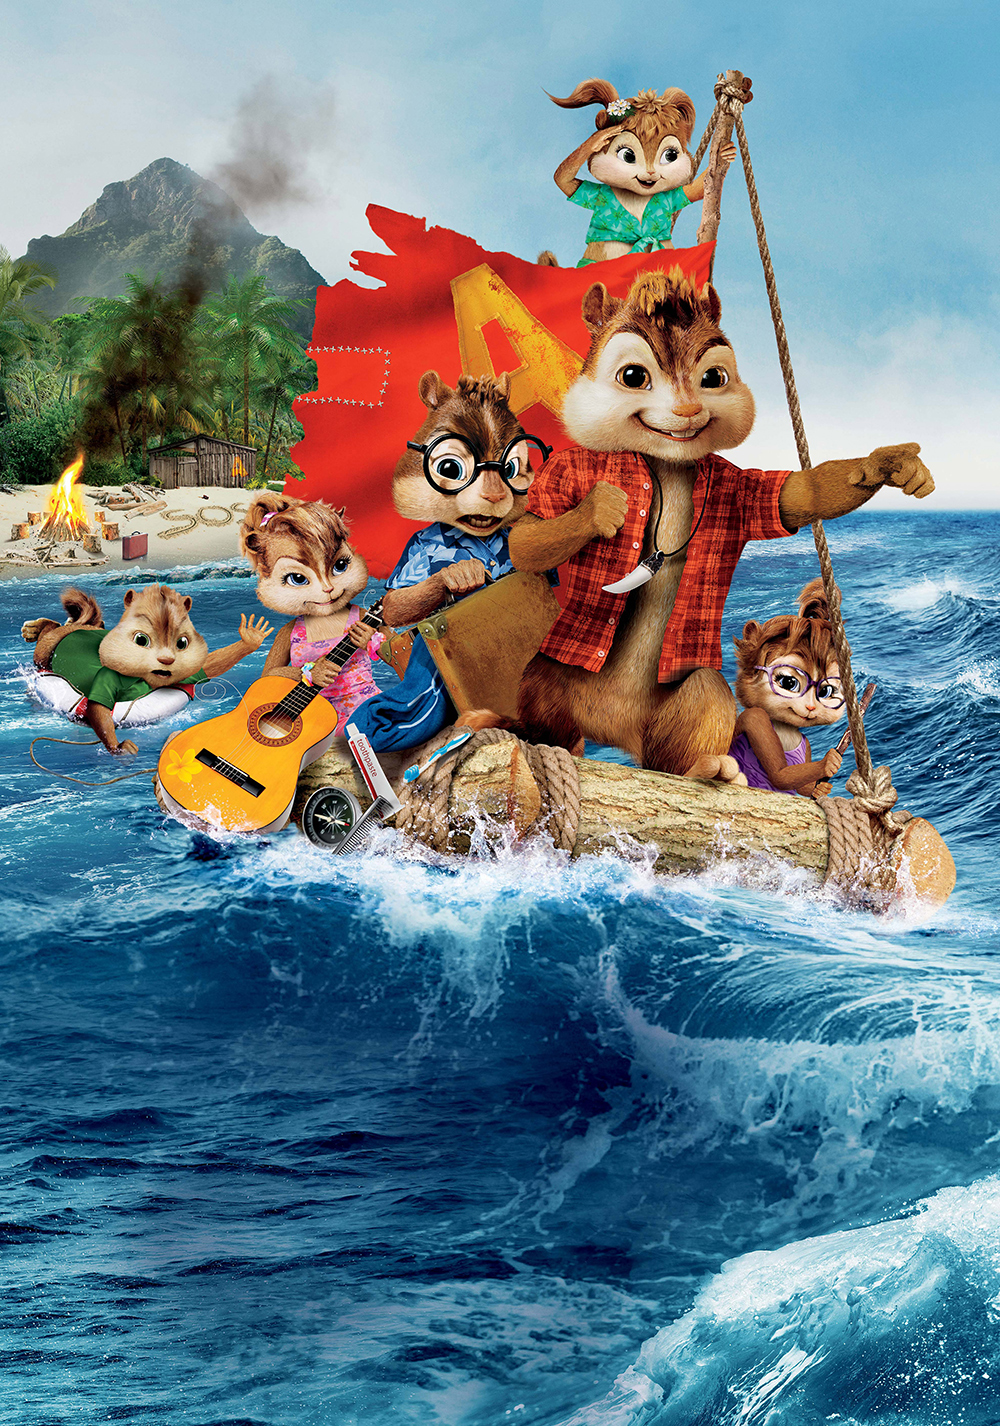 View, Download, Rate, and Comment on this Alvin and the Chipmunks: Chipwrec...